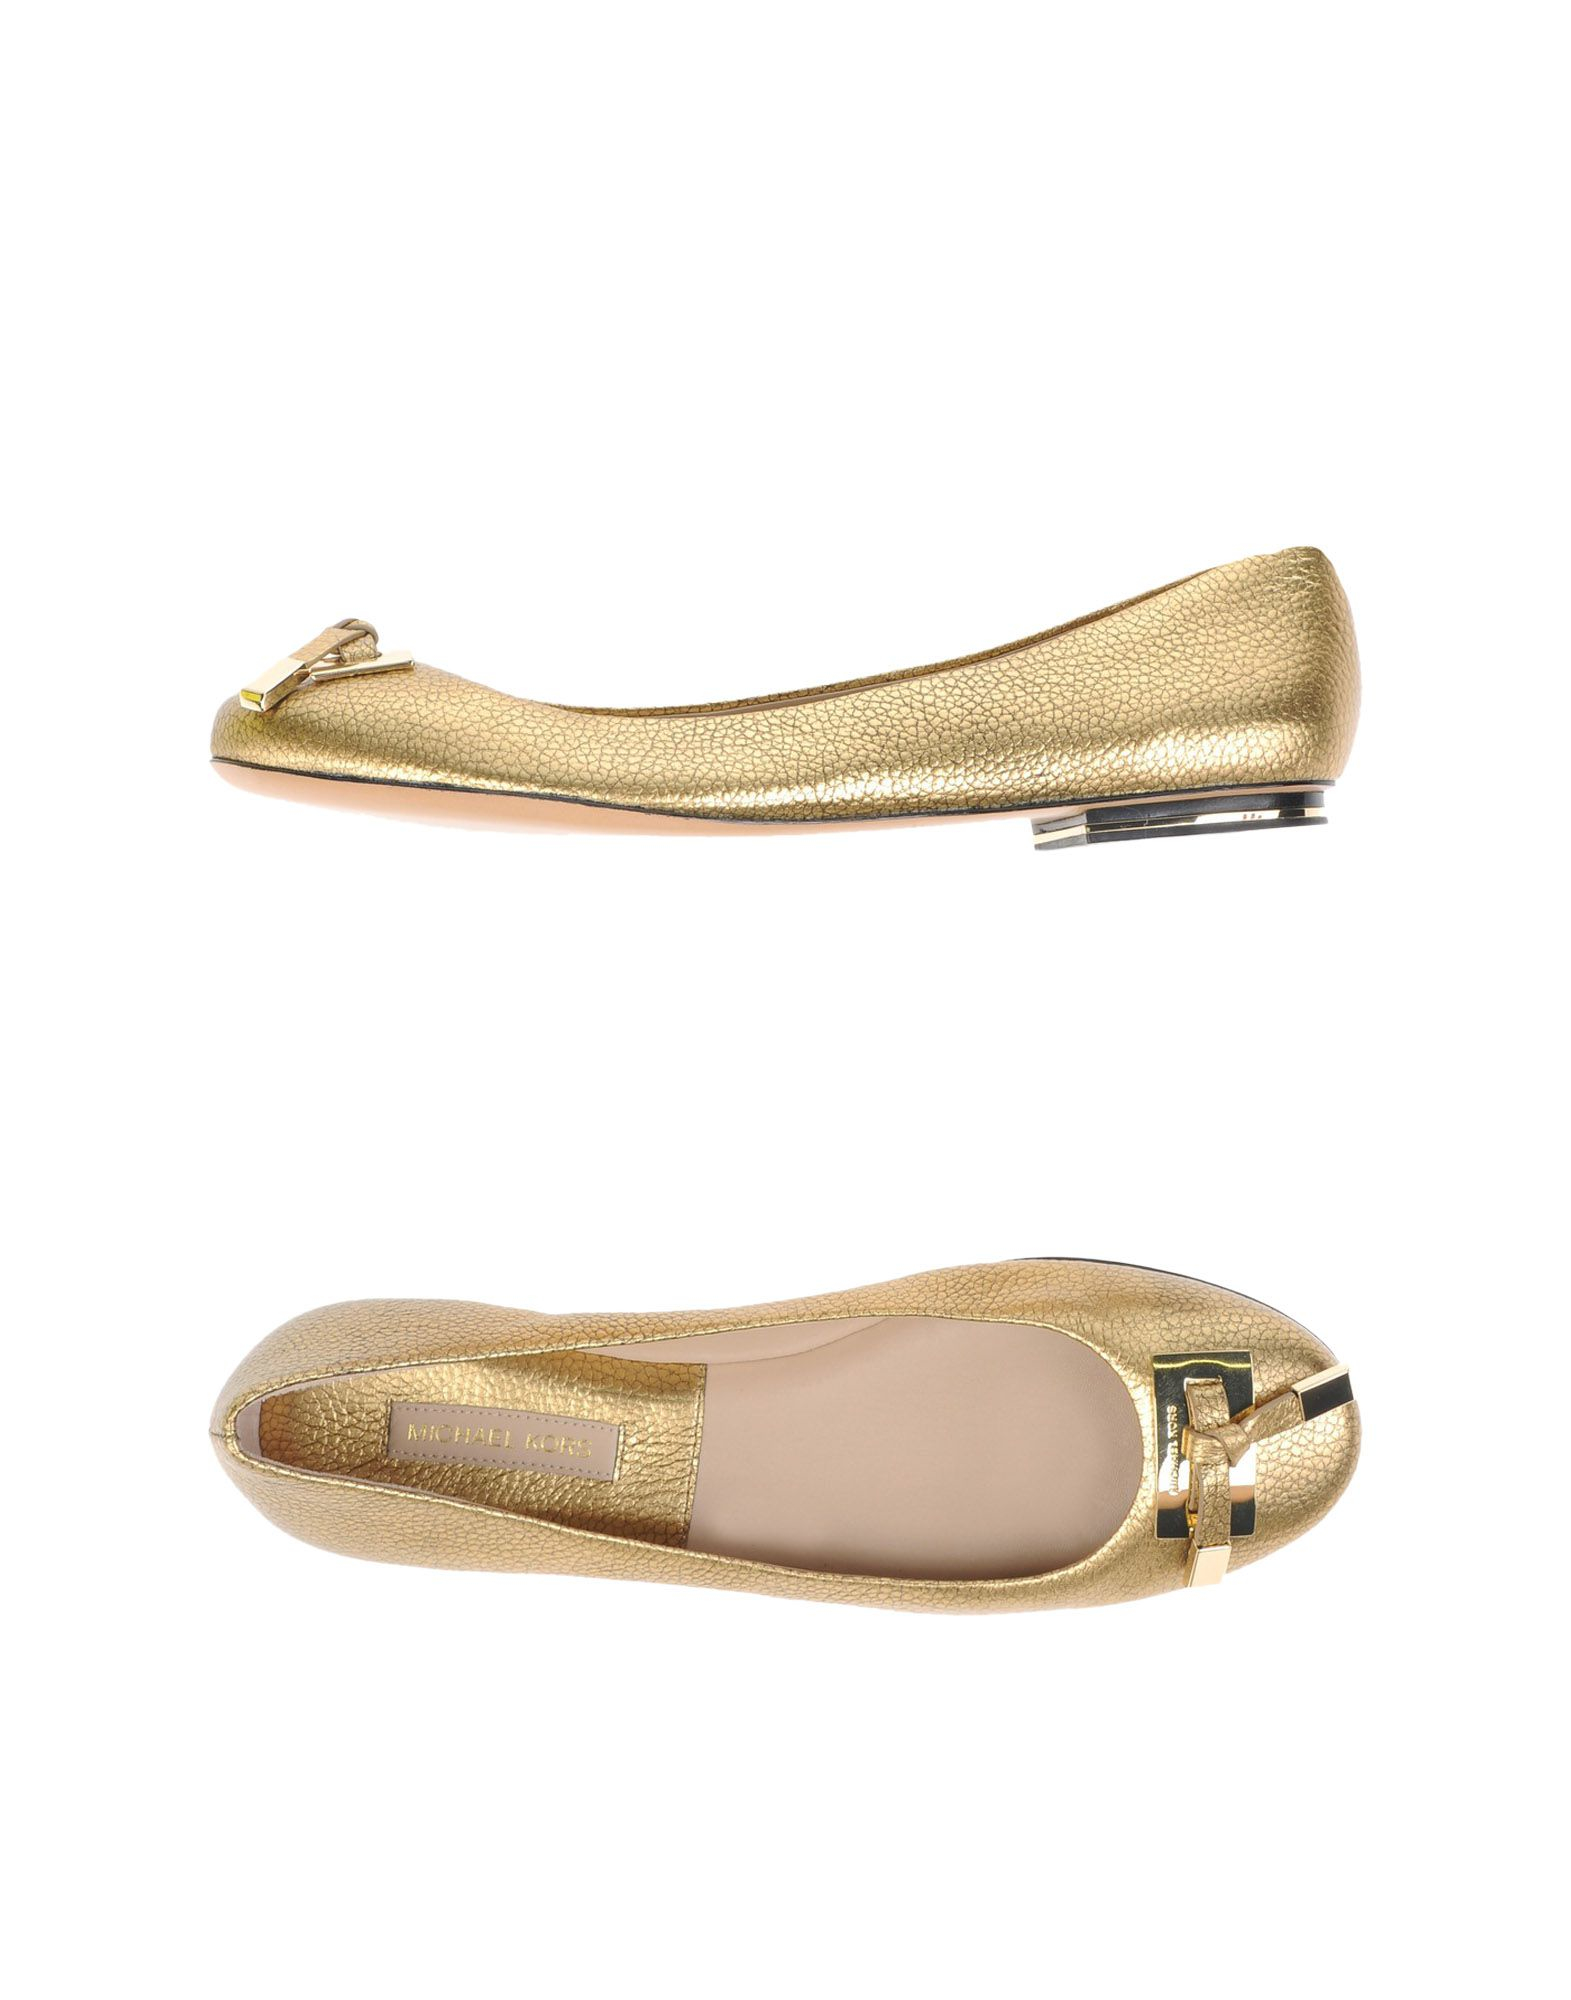 Michael Kors Leather Ballet Flats in 